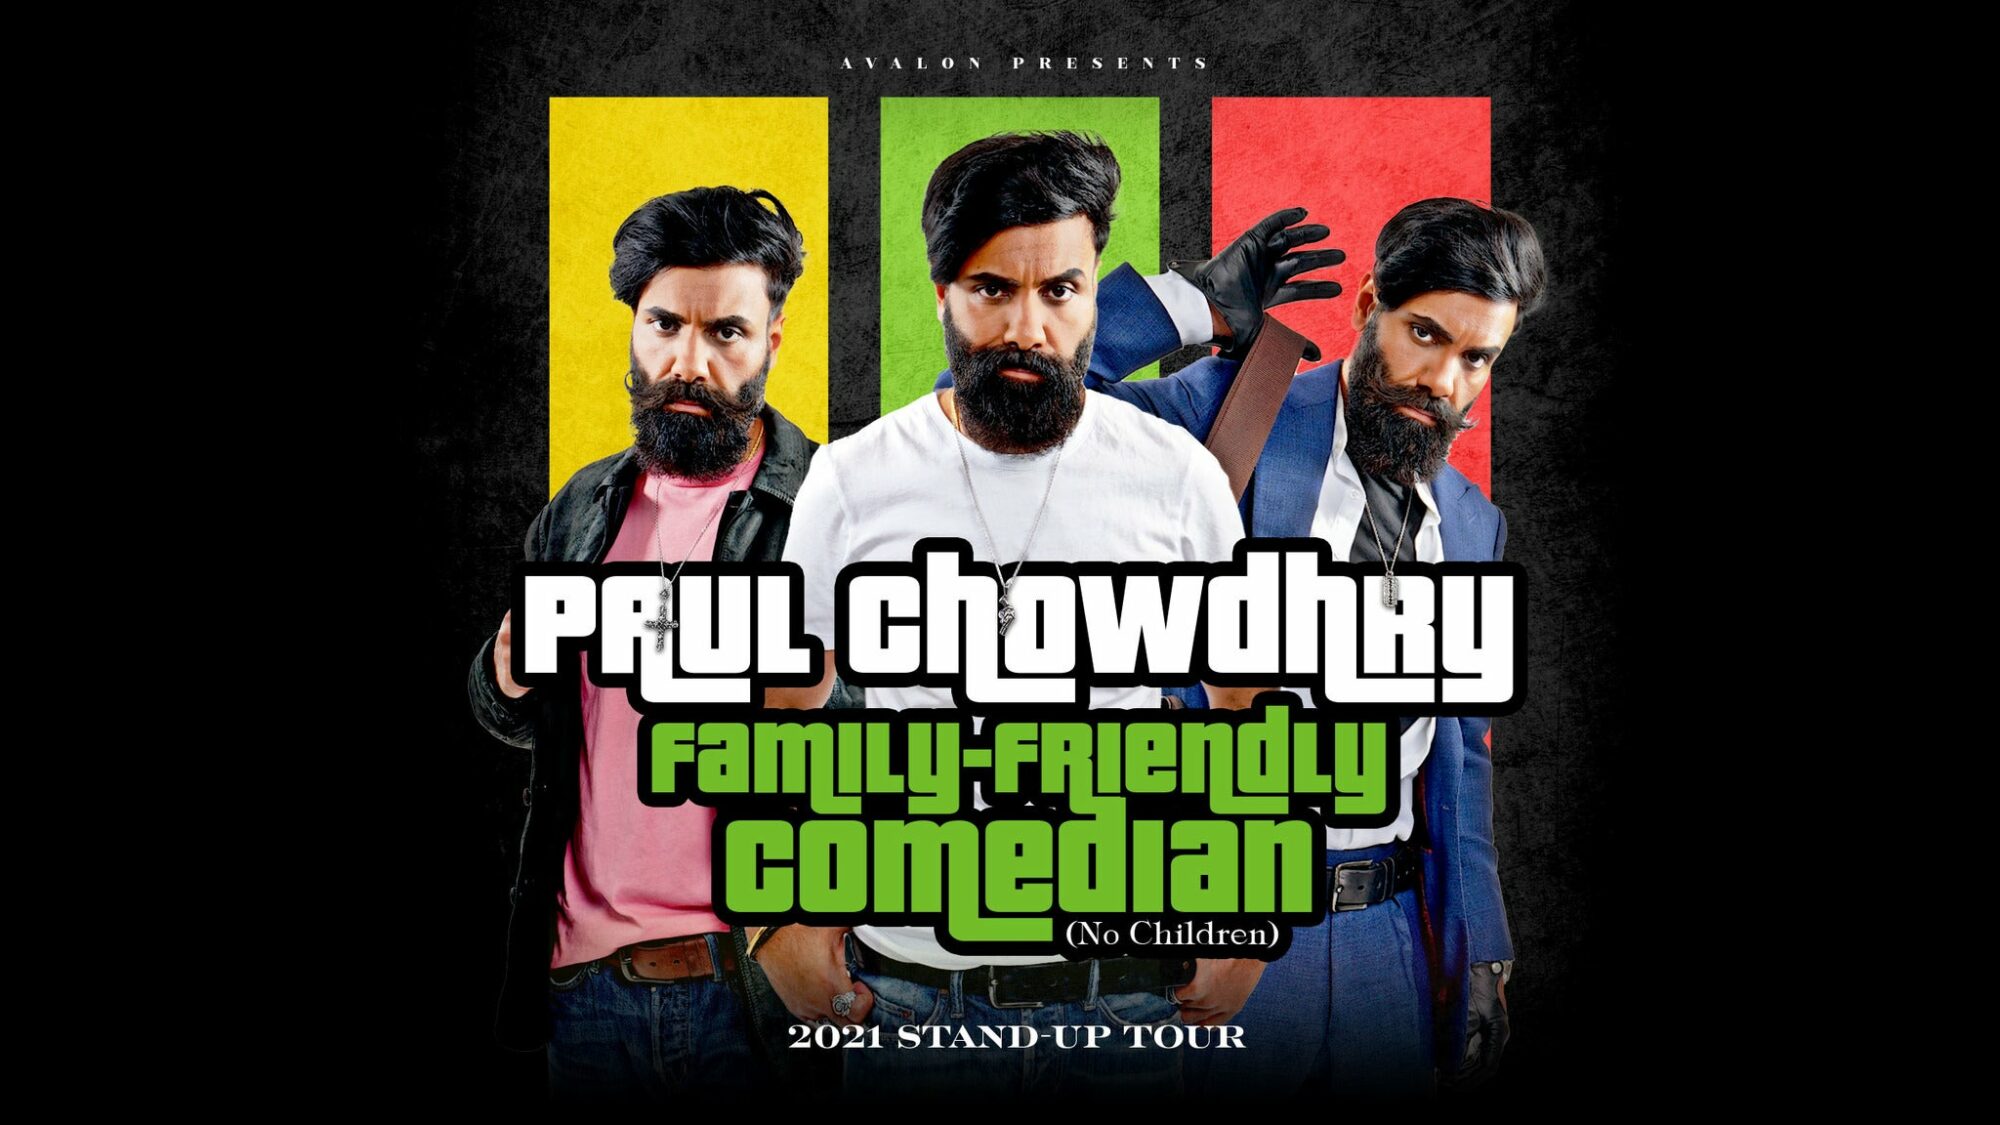 Image name Paul Chowdhry Family Friendly Comedian at St Georges Hall Bradford Bradford the 12 image from the post Events in Yorkshire.com.